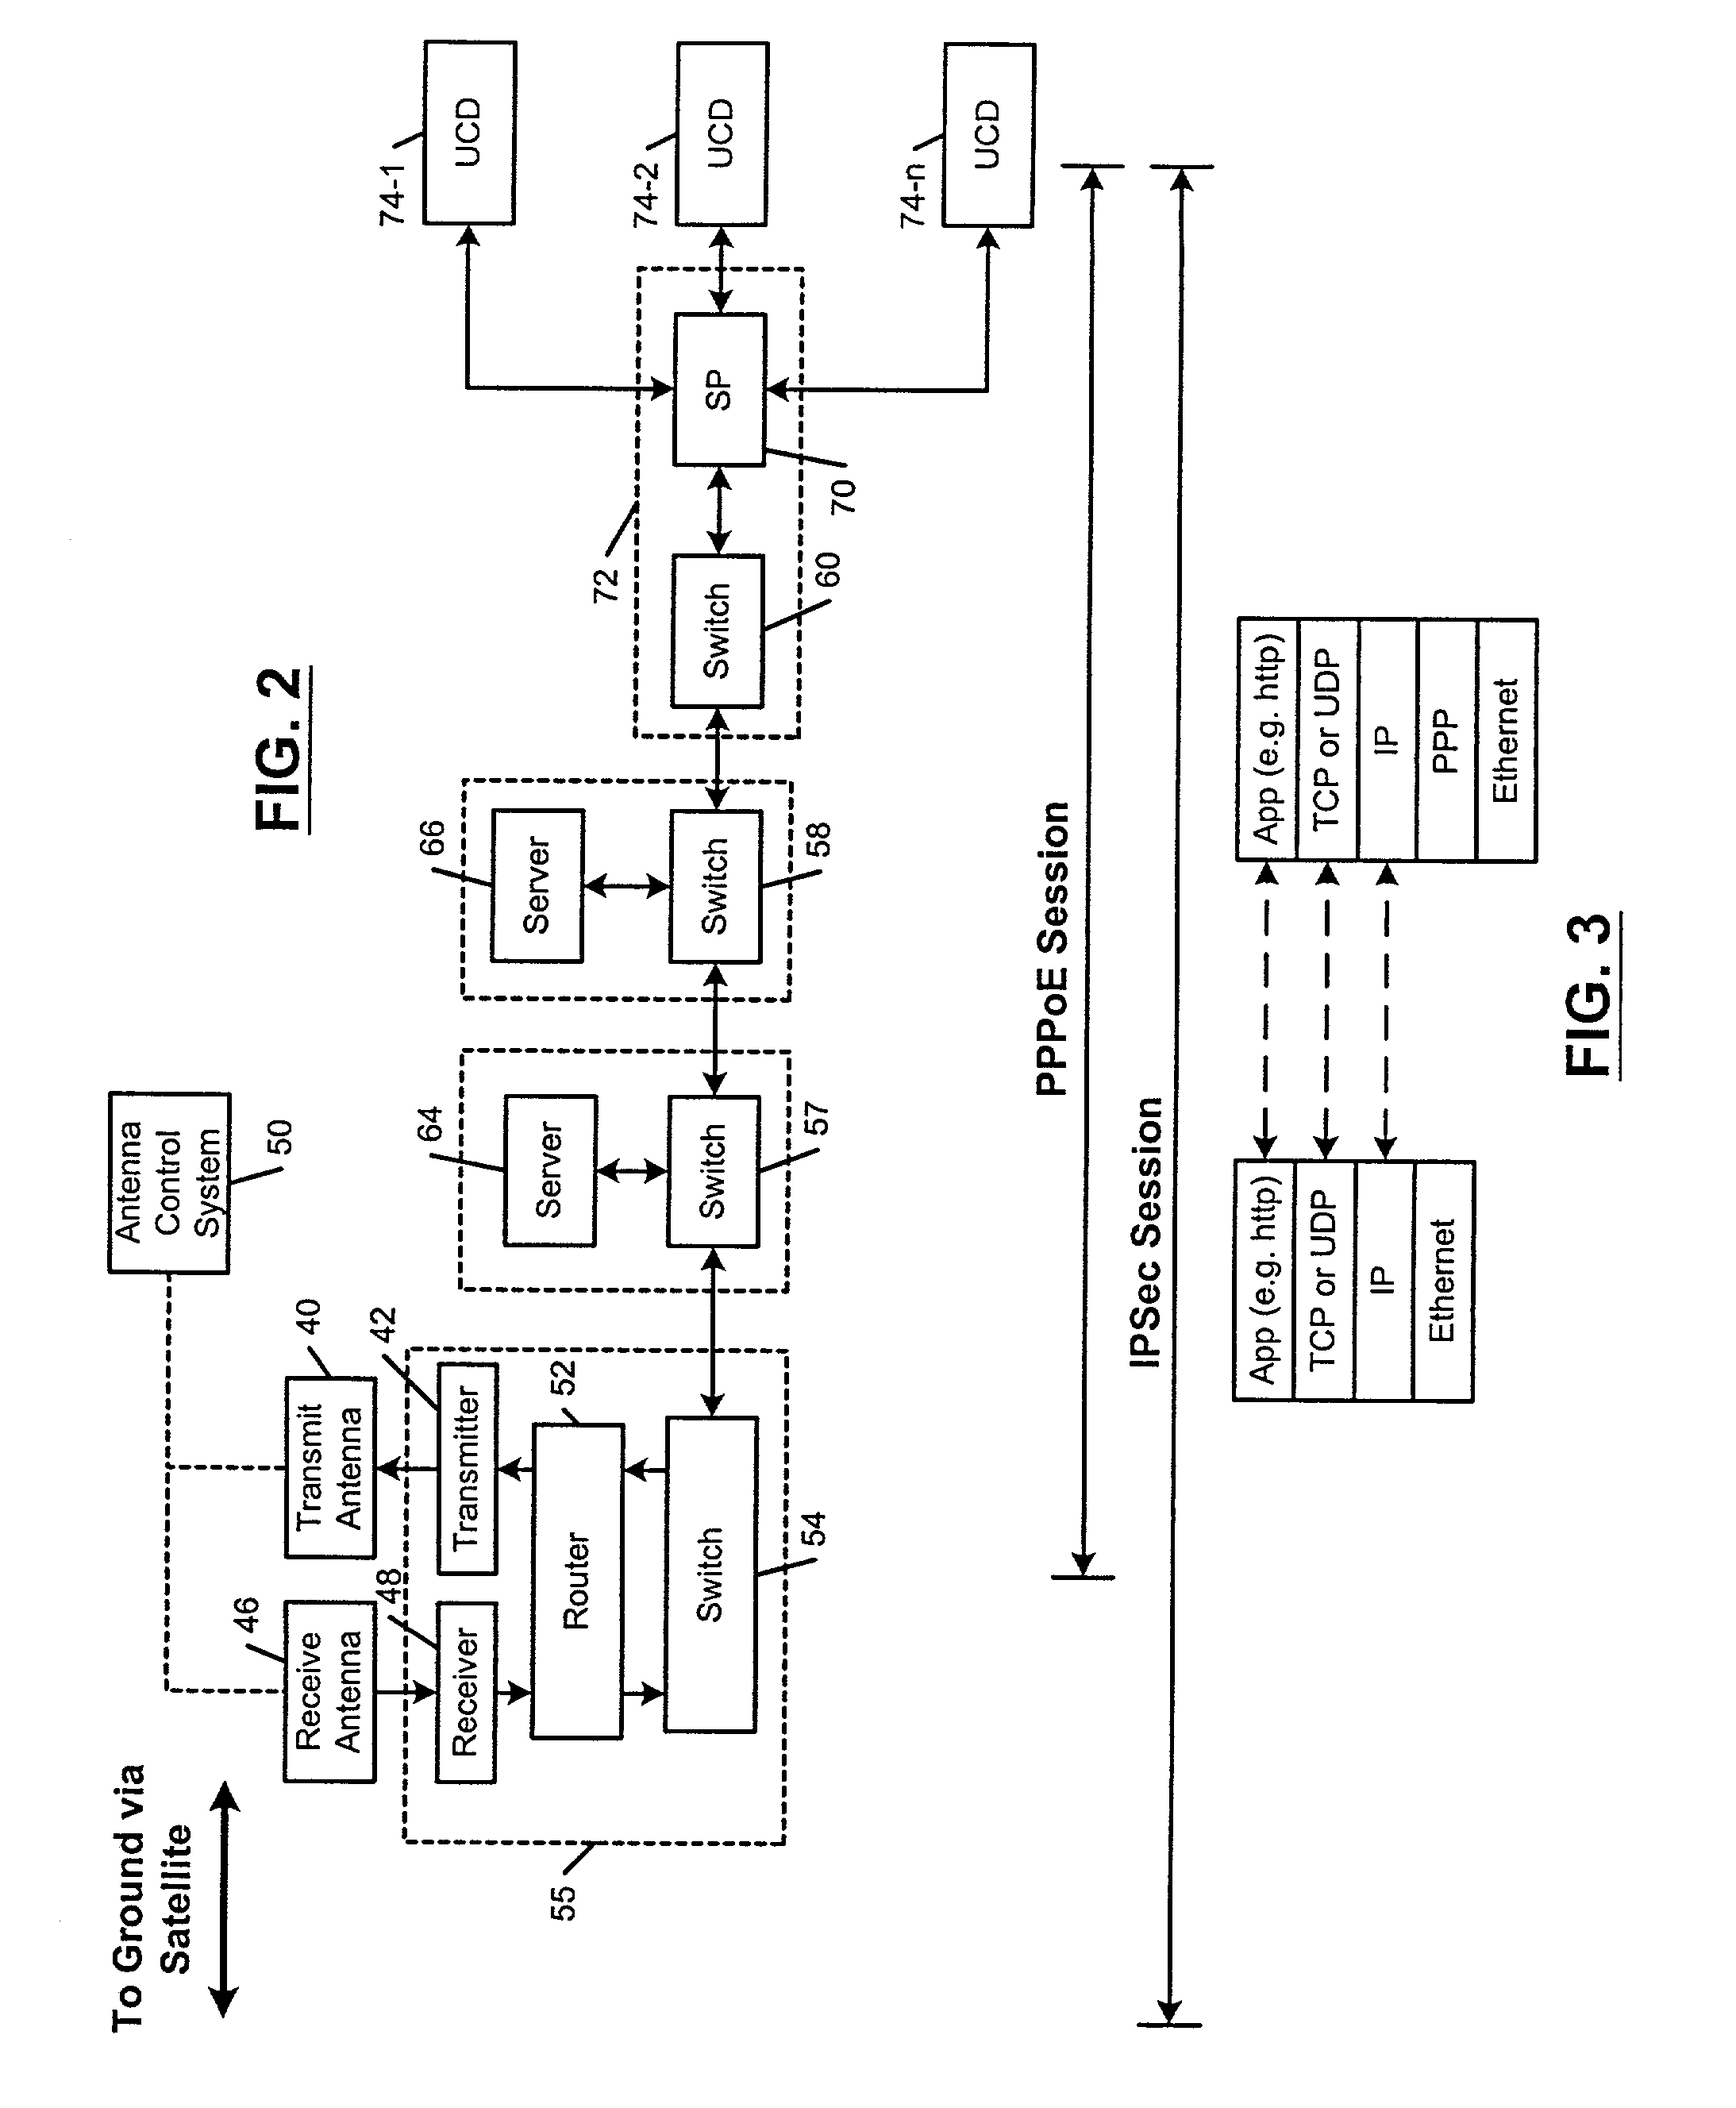 Mobile communications network using point-to-point protocol over ethernet